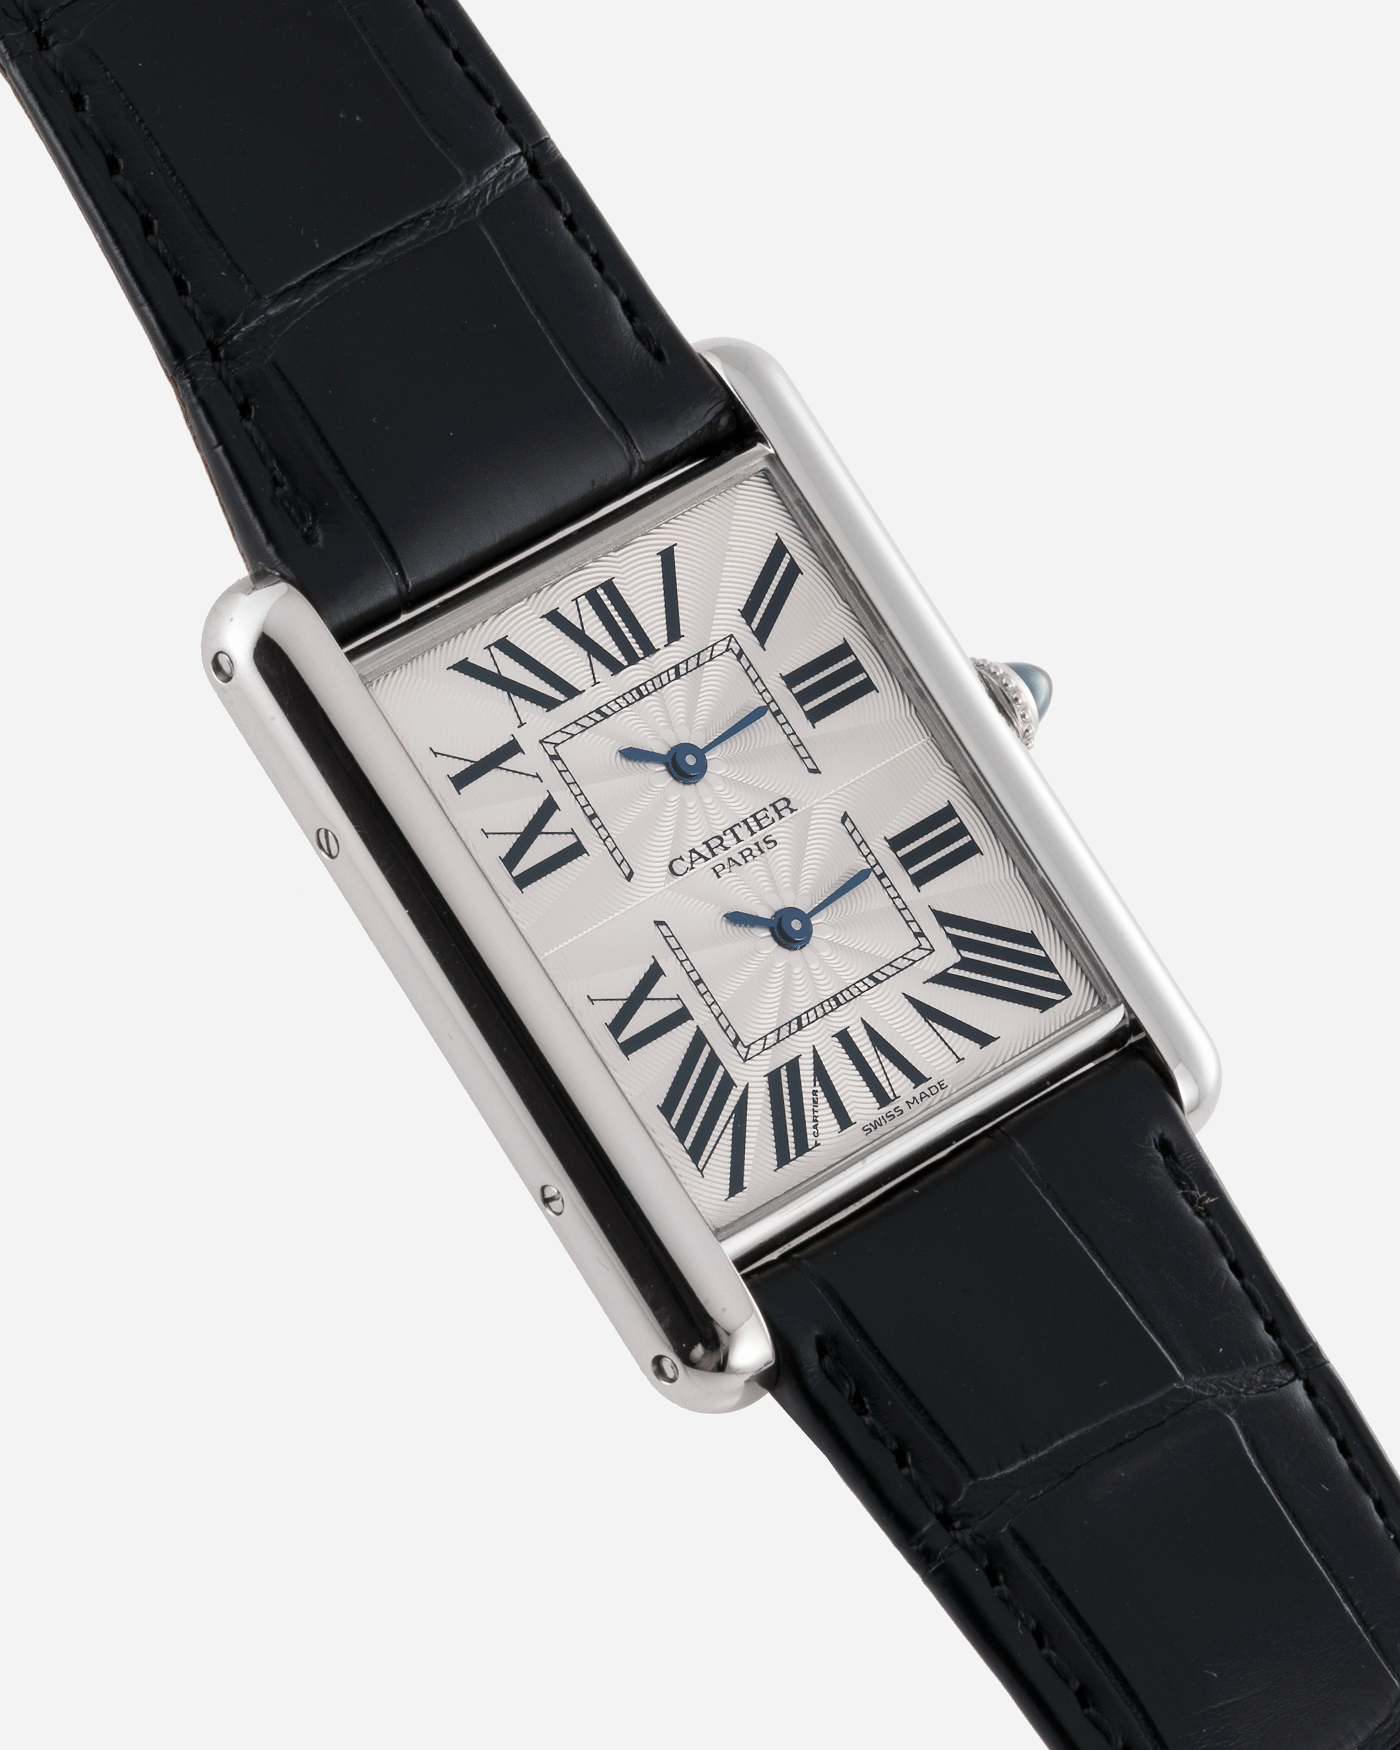 Brand: Cartier Year: 2010 Model: CPCP Tank Two Time Zone Reference: 2917 Material: 18k White Gold Movement: Piaget-Based Manually Wound Cal. 9901 MC Case Diameter: 29.3mm width, 38.3mm length Strap: Cartier Black Alligator Strap with 18k White Gold Cartier Deployant Clasp